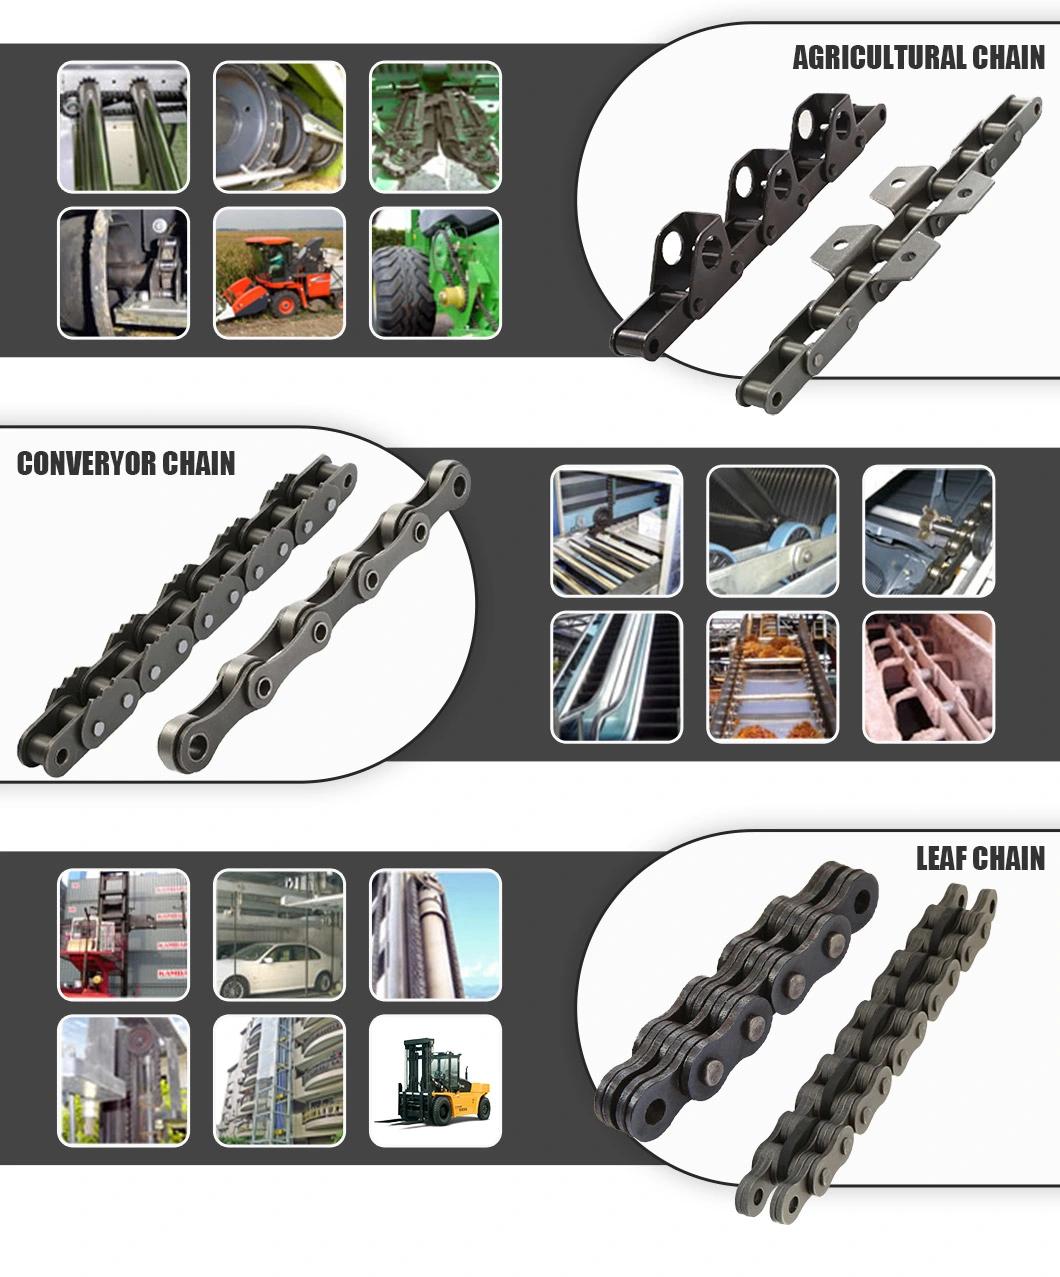 Widely Used C Type Agricultural Chain with Attachment